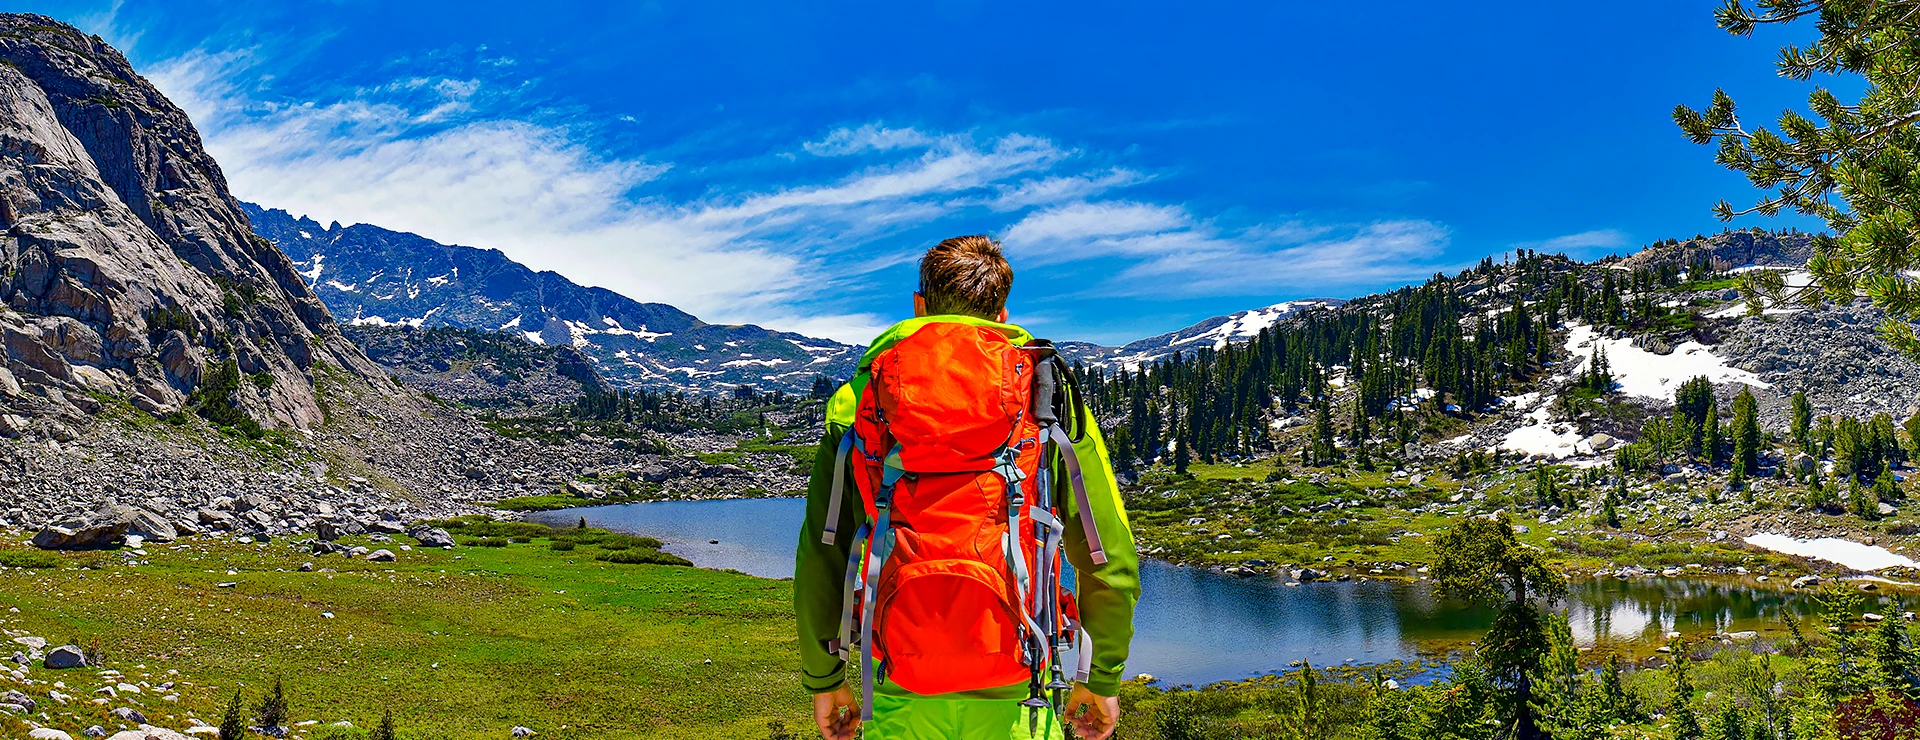 Hiking use case banner - with